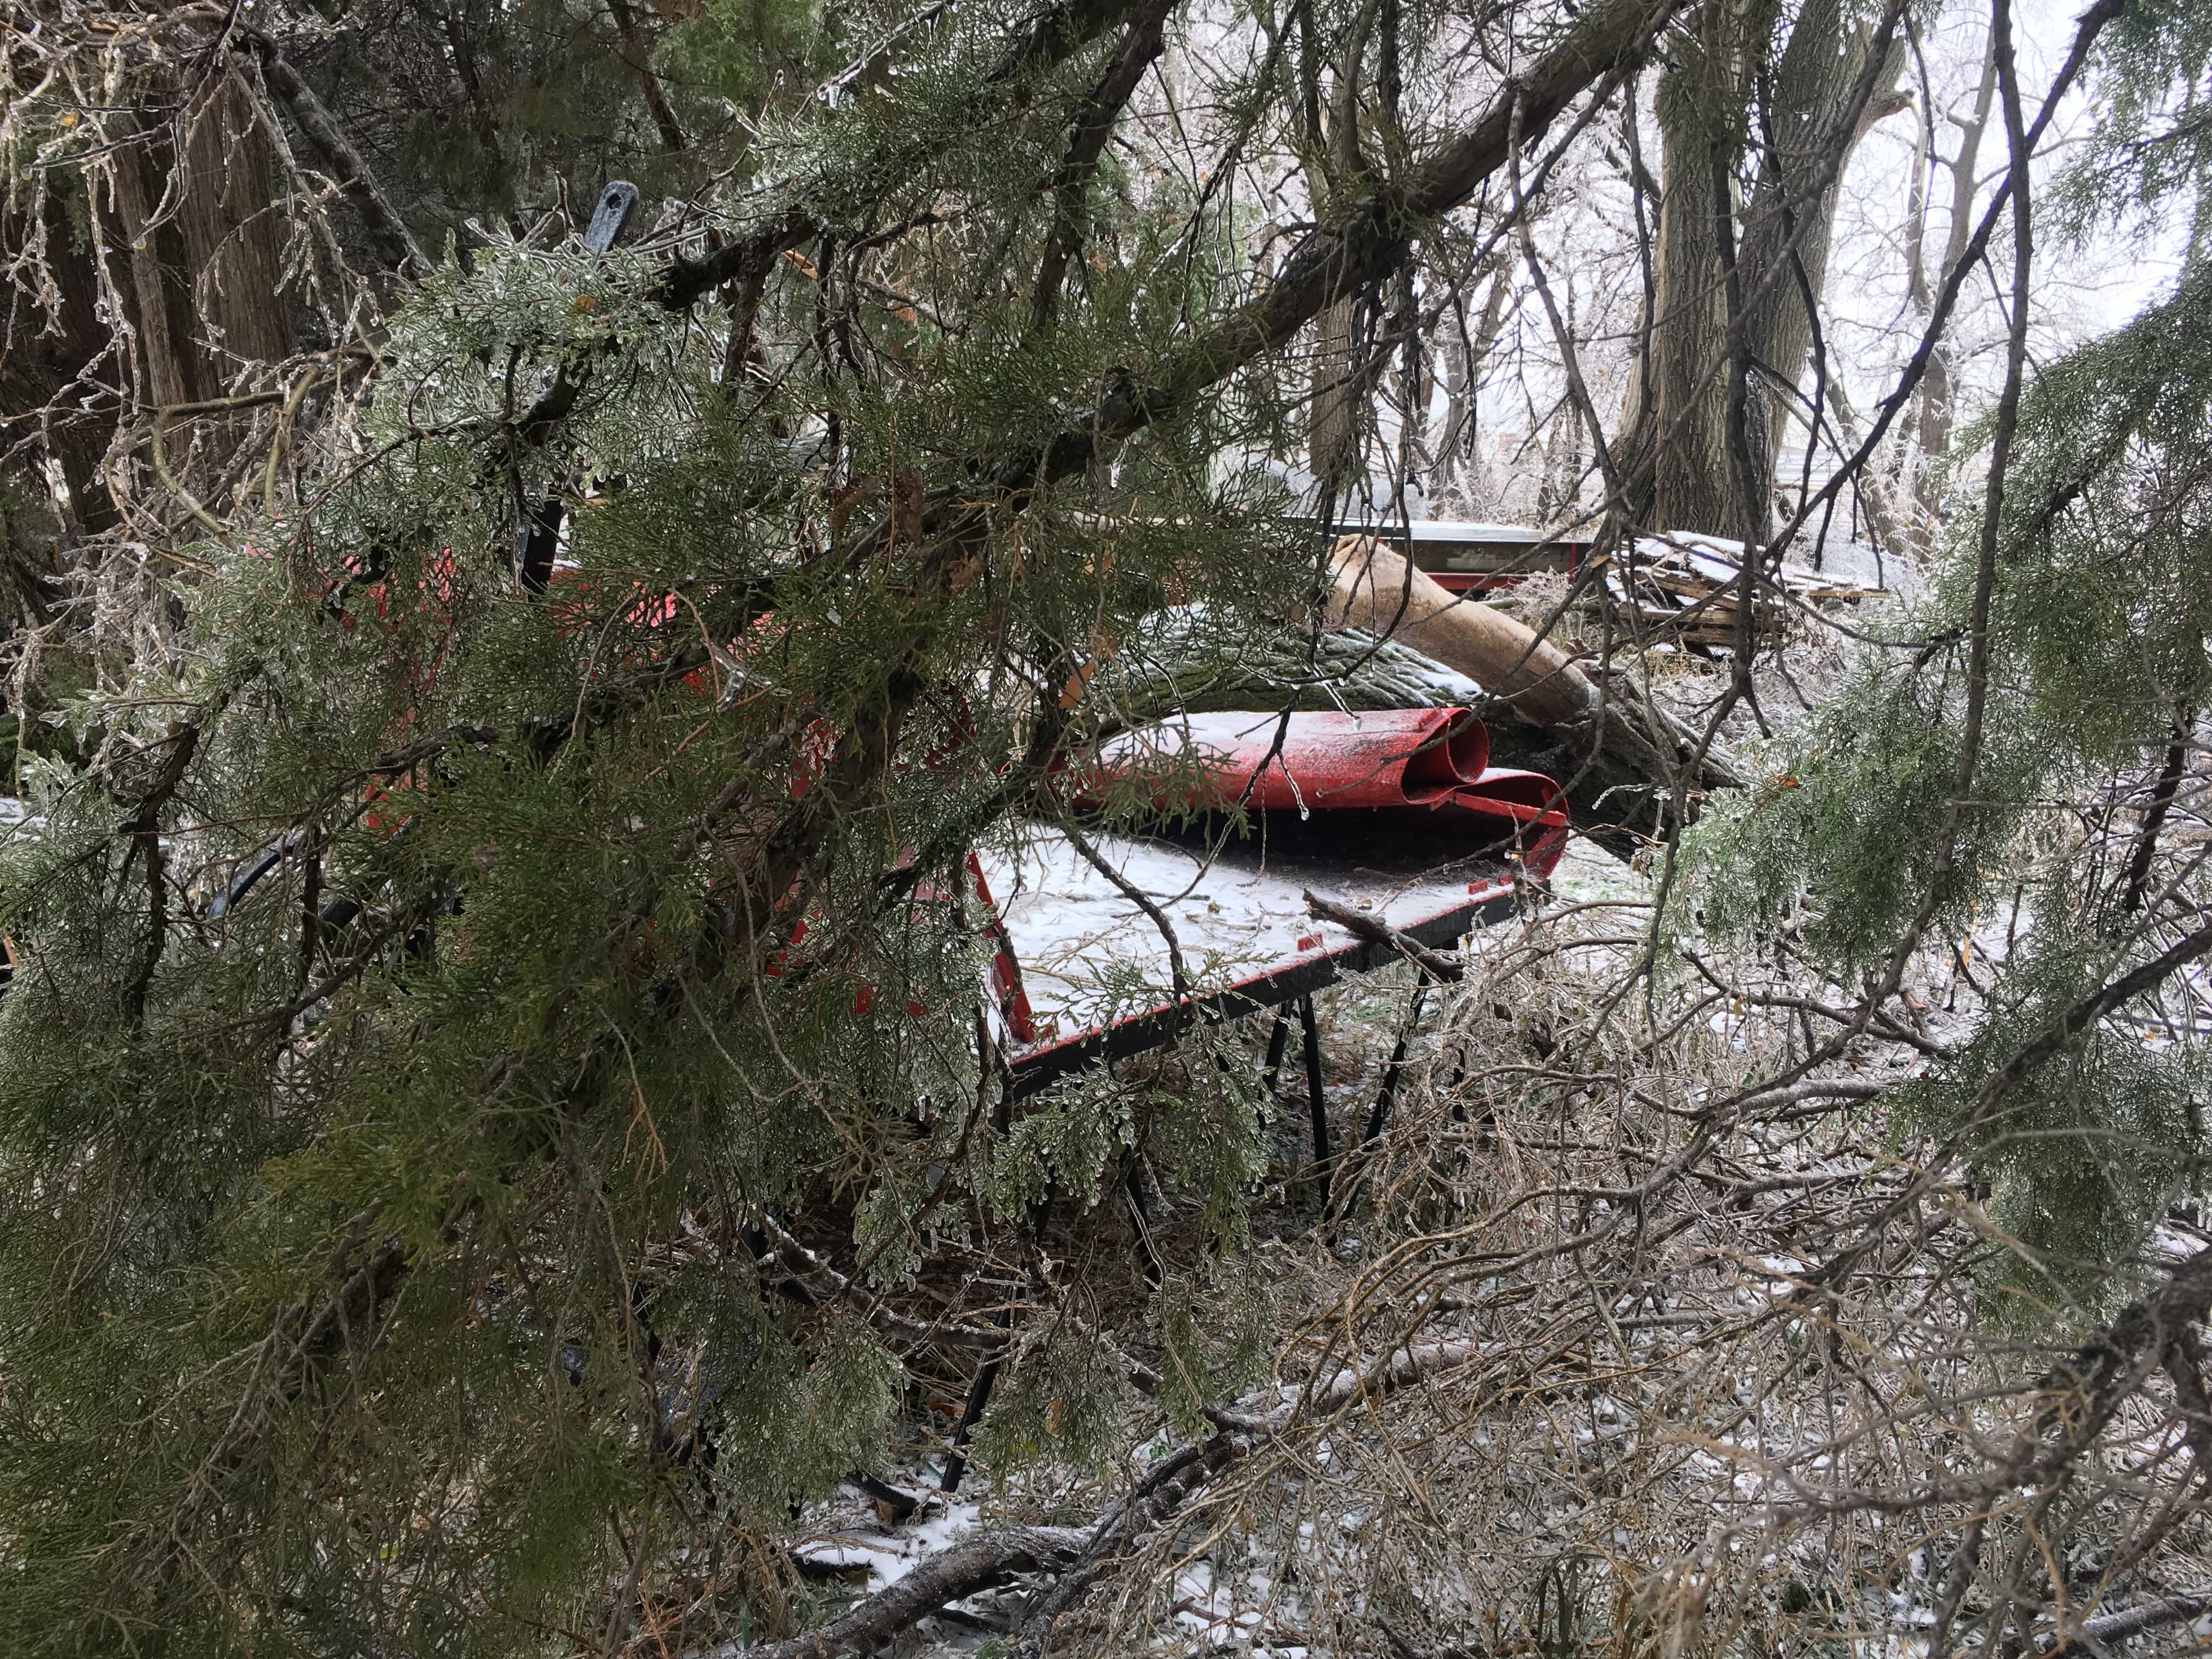 sled smashed by tree in ice storm